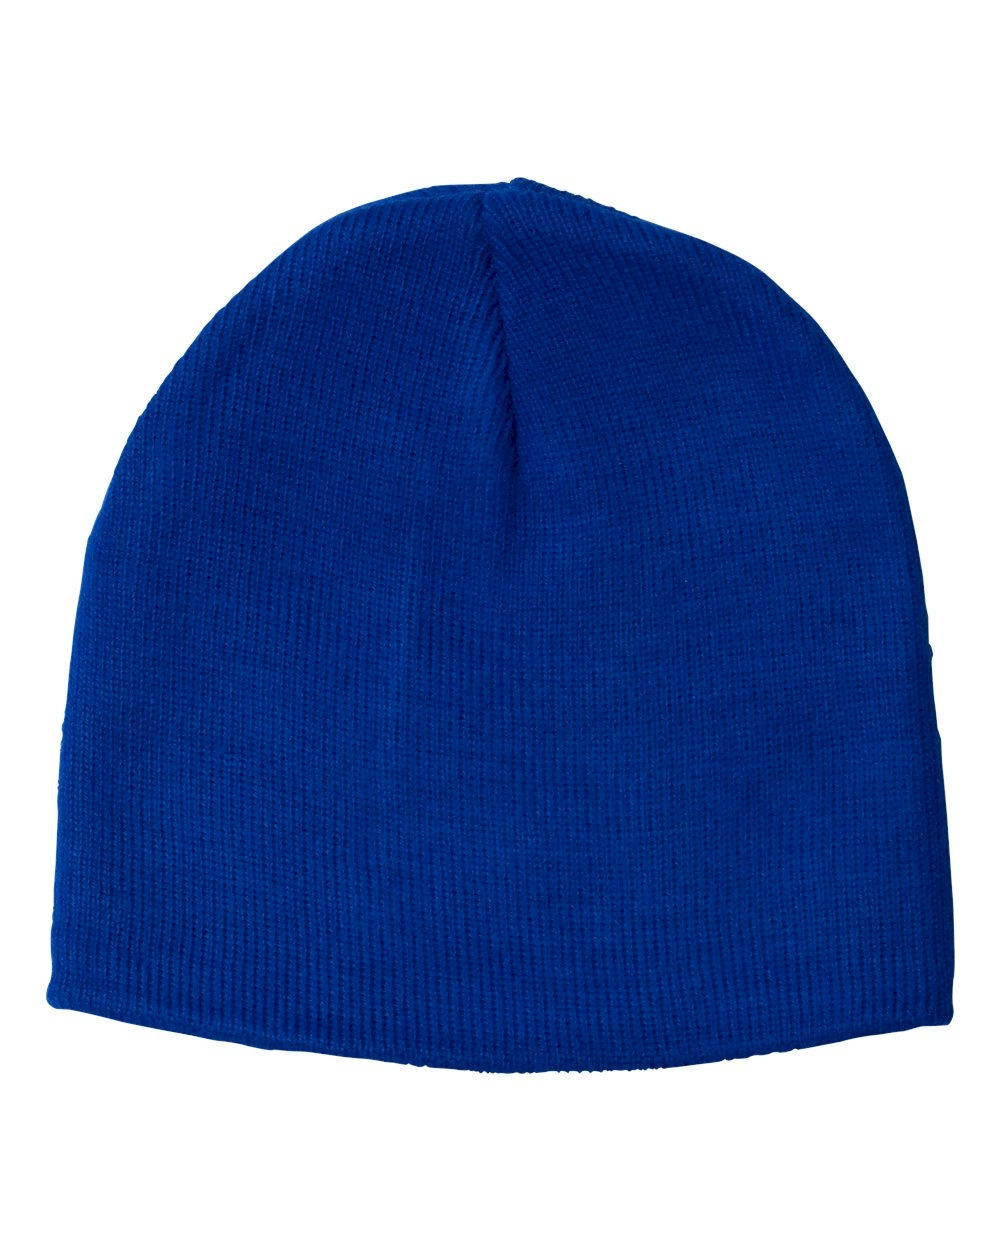 8.5" Knit Beanie Embroidery Blanks - Royal Blue